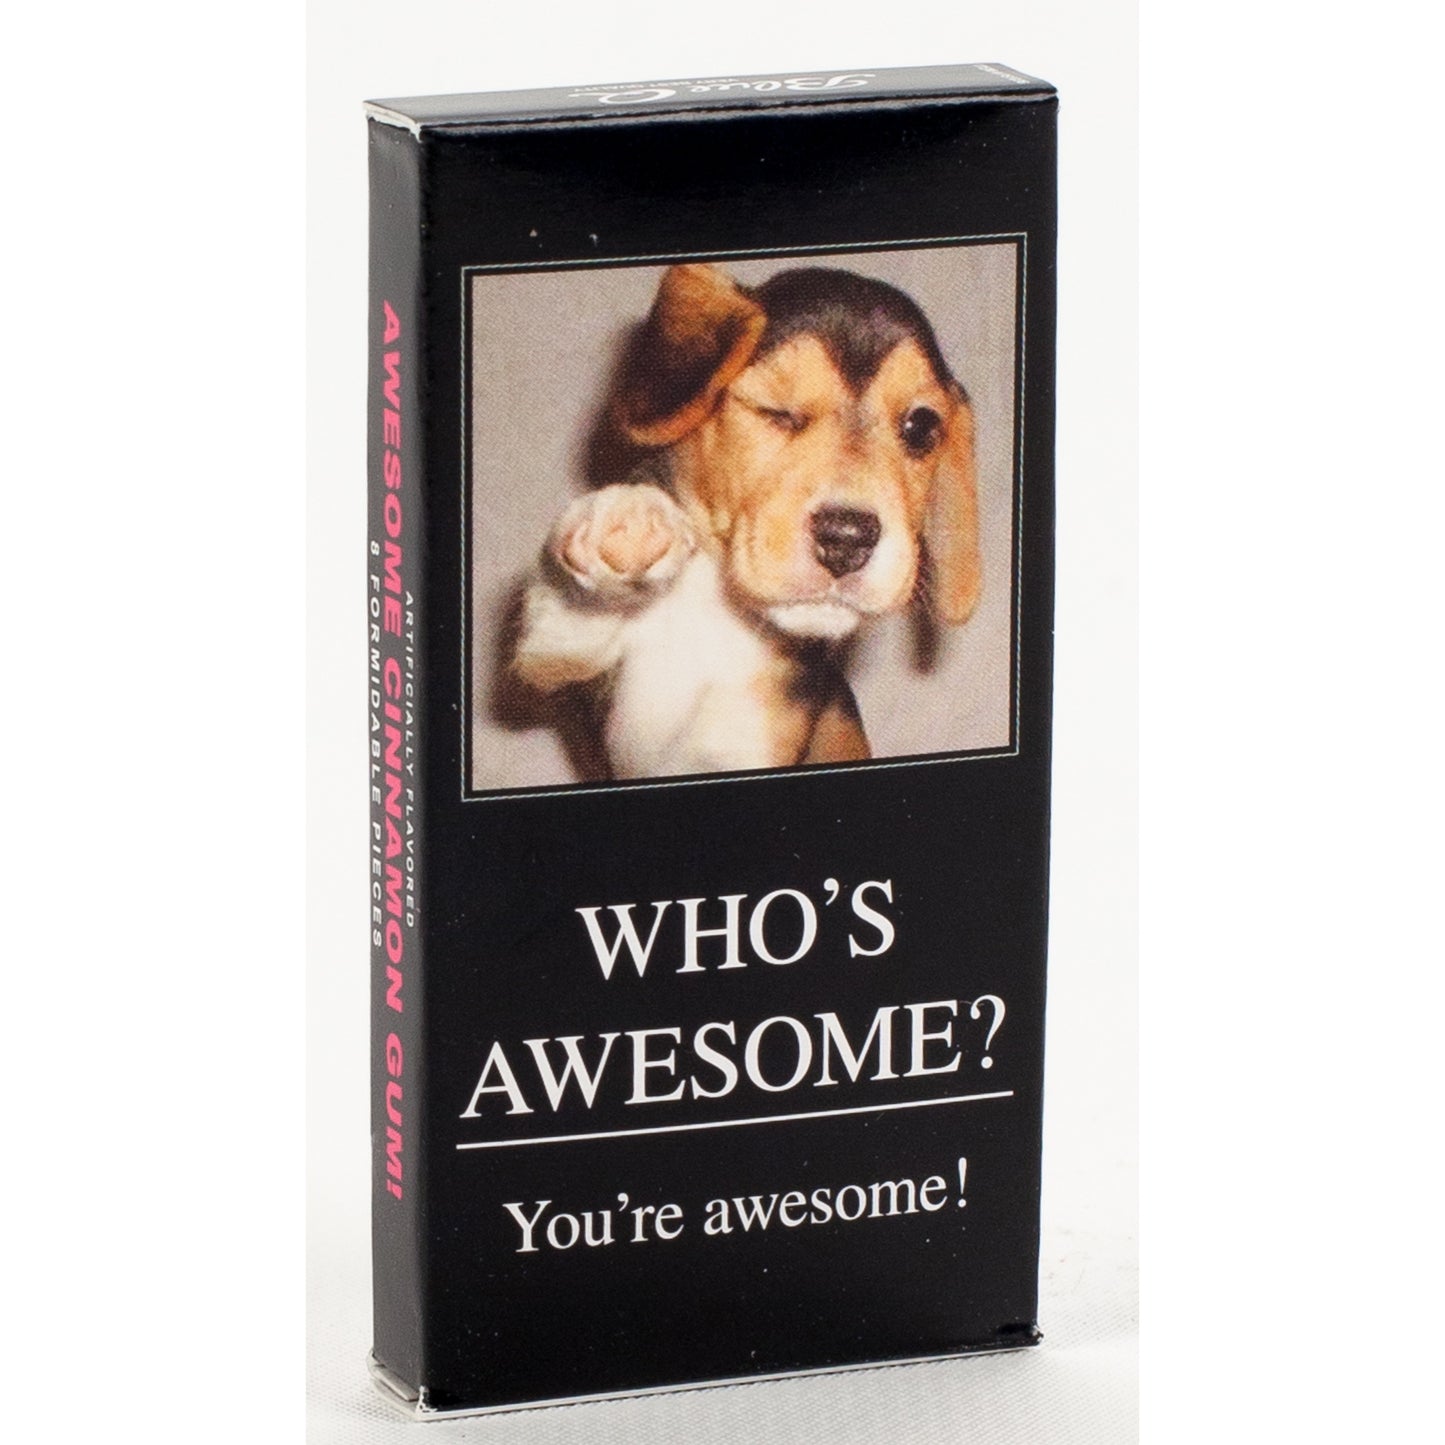 Blue Q gum with a dog on the front that is pointing out at the reader. The text reads: Who's awesome? You're awesome!